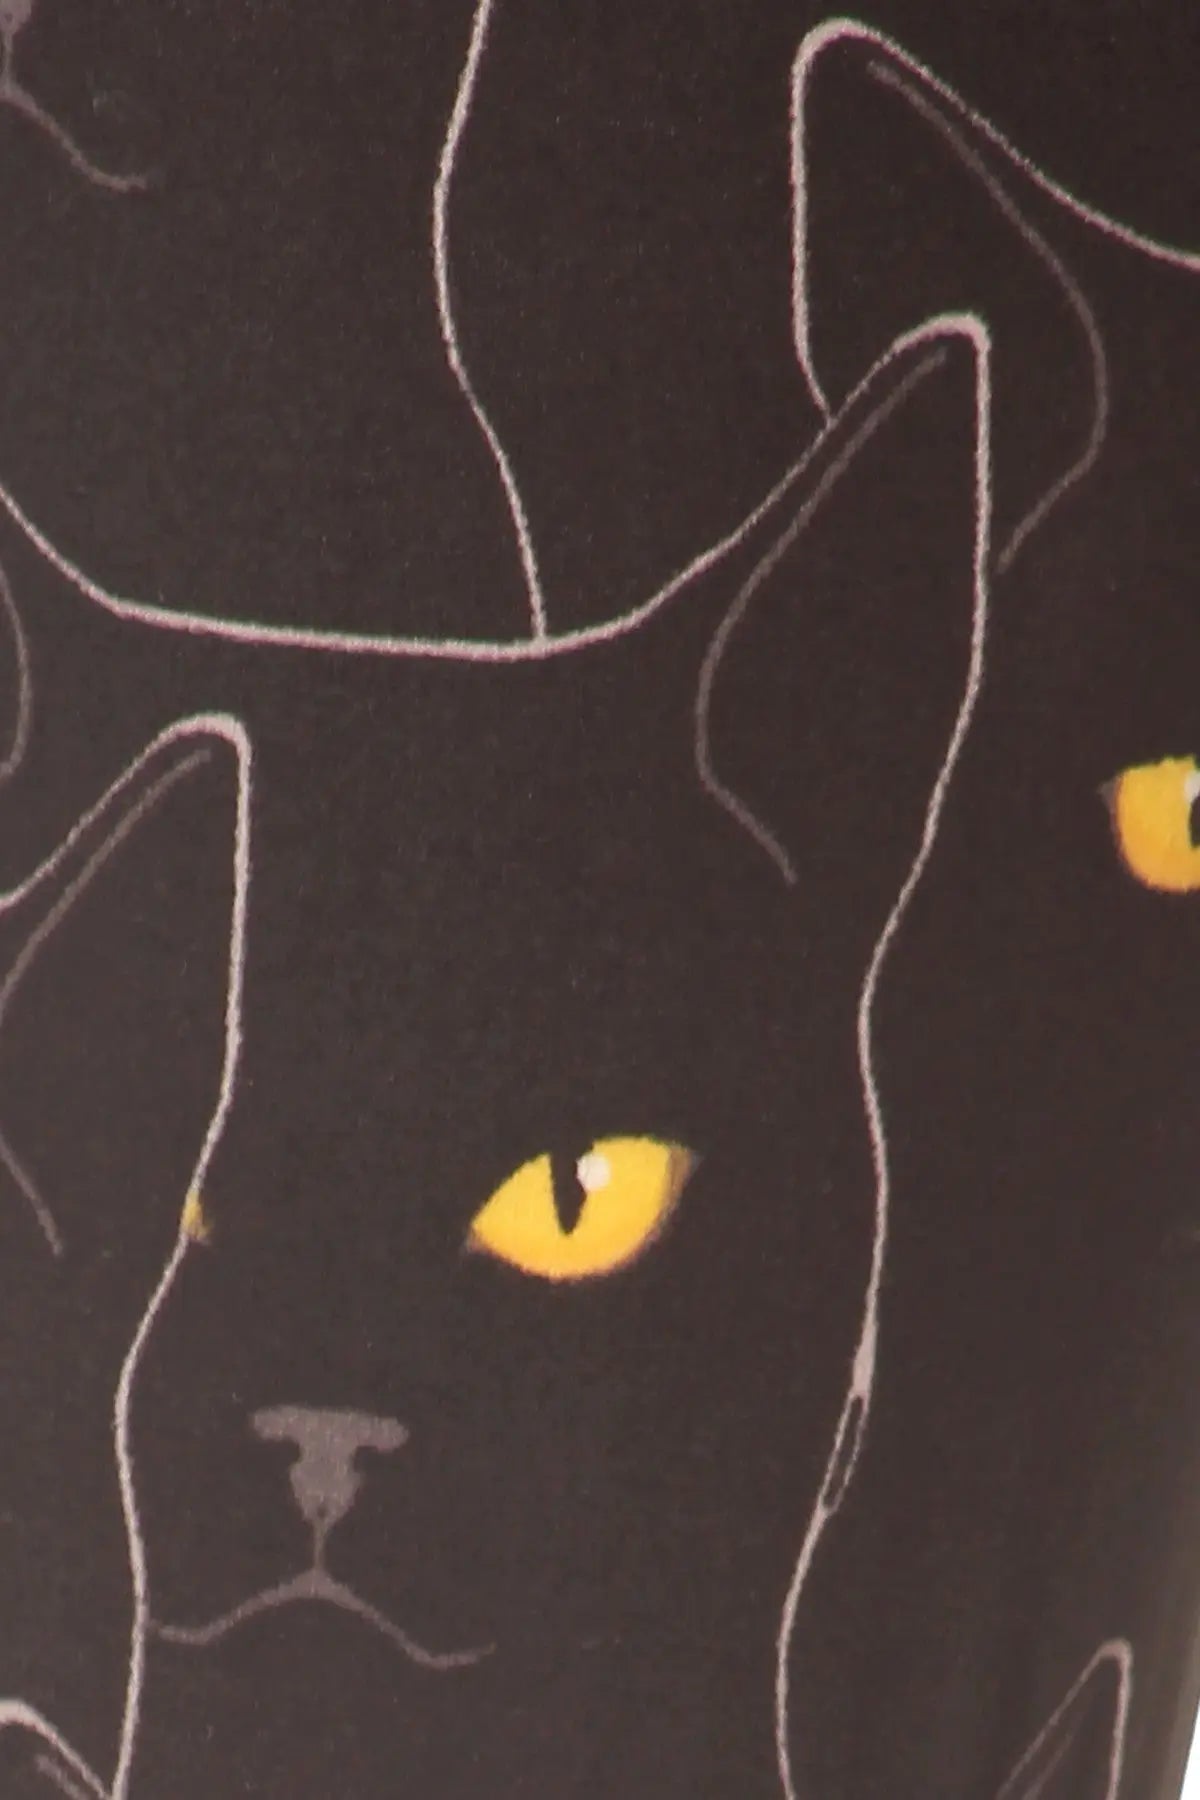 Black Cats Printed, High Waisted Leggings In A Fit Style, With An Elastic Waistband Sunny EvE Fashion